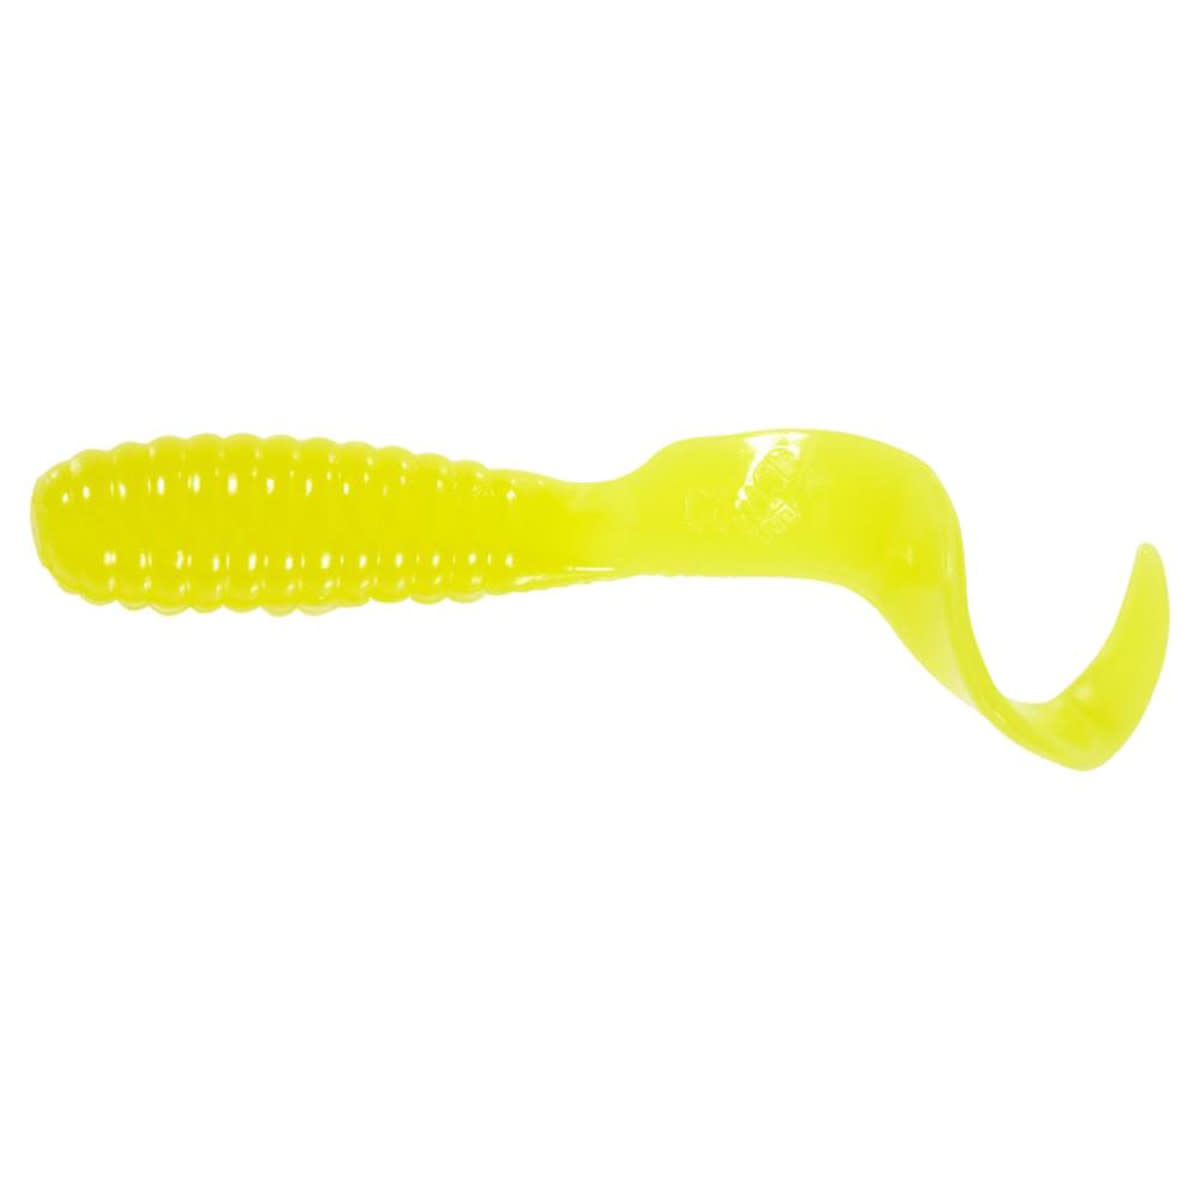 MR. TWISTER 2 TEENIE CURLY TAIL GRUB - YELLOW 20/PK USES 1/16 OZ JIGHEAD  (NOT INCLUDED)